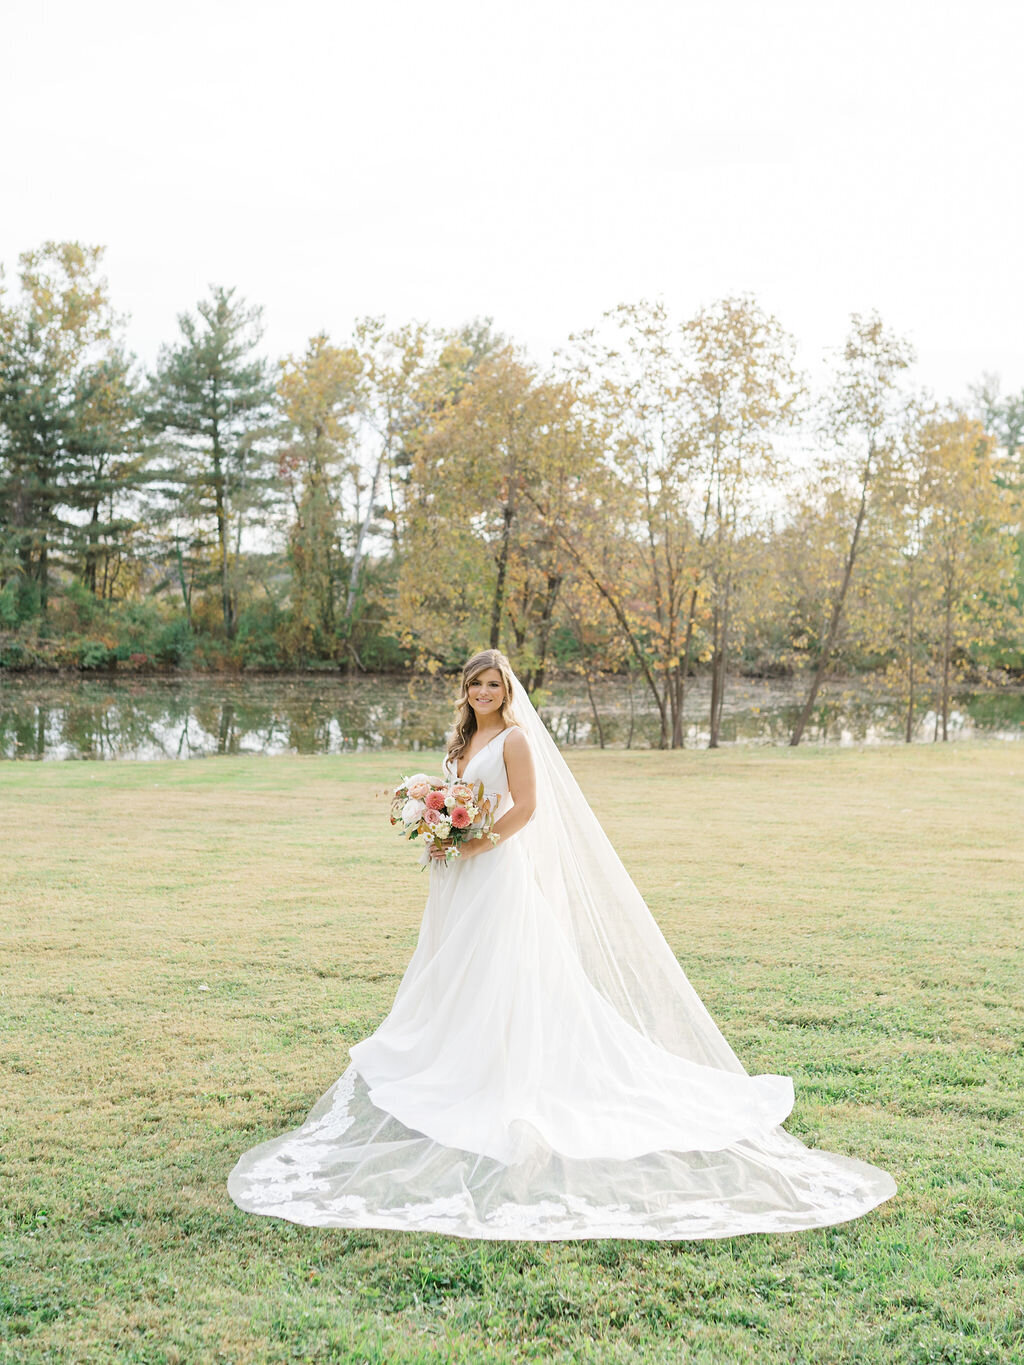 50_Kate Campbell Floral Autumnal Estate Wedding by Courtney Dueppengiesser photo